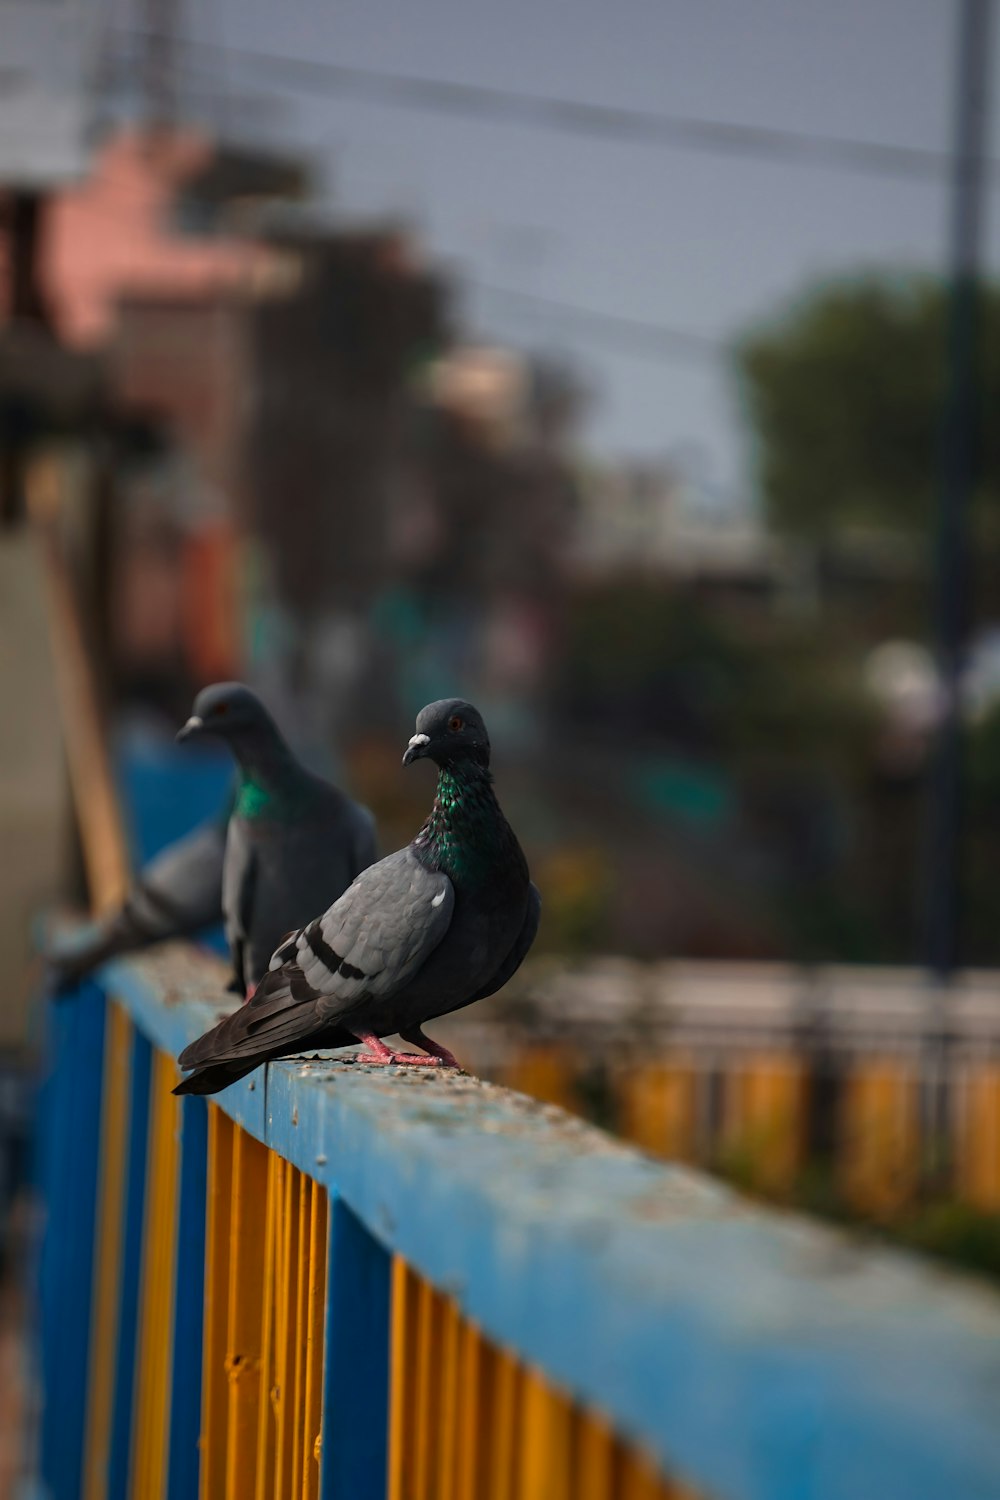 black and gray pigeon on blue metal fence during daytime